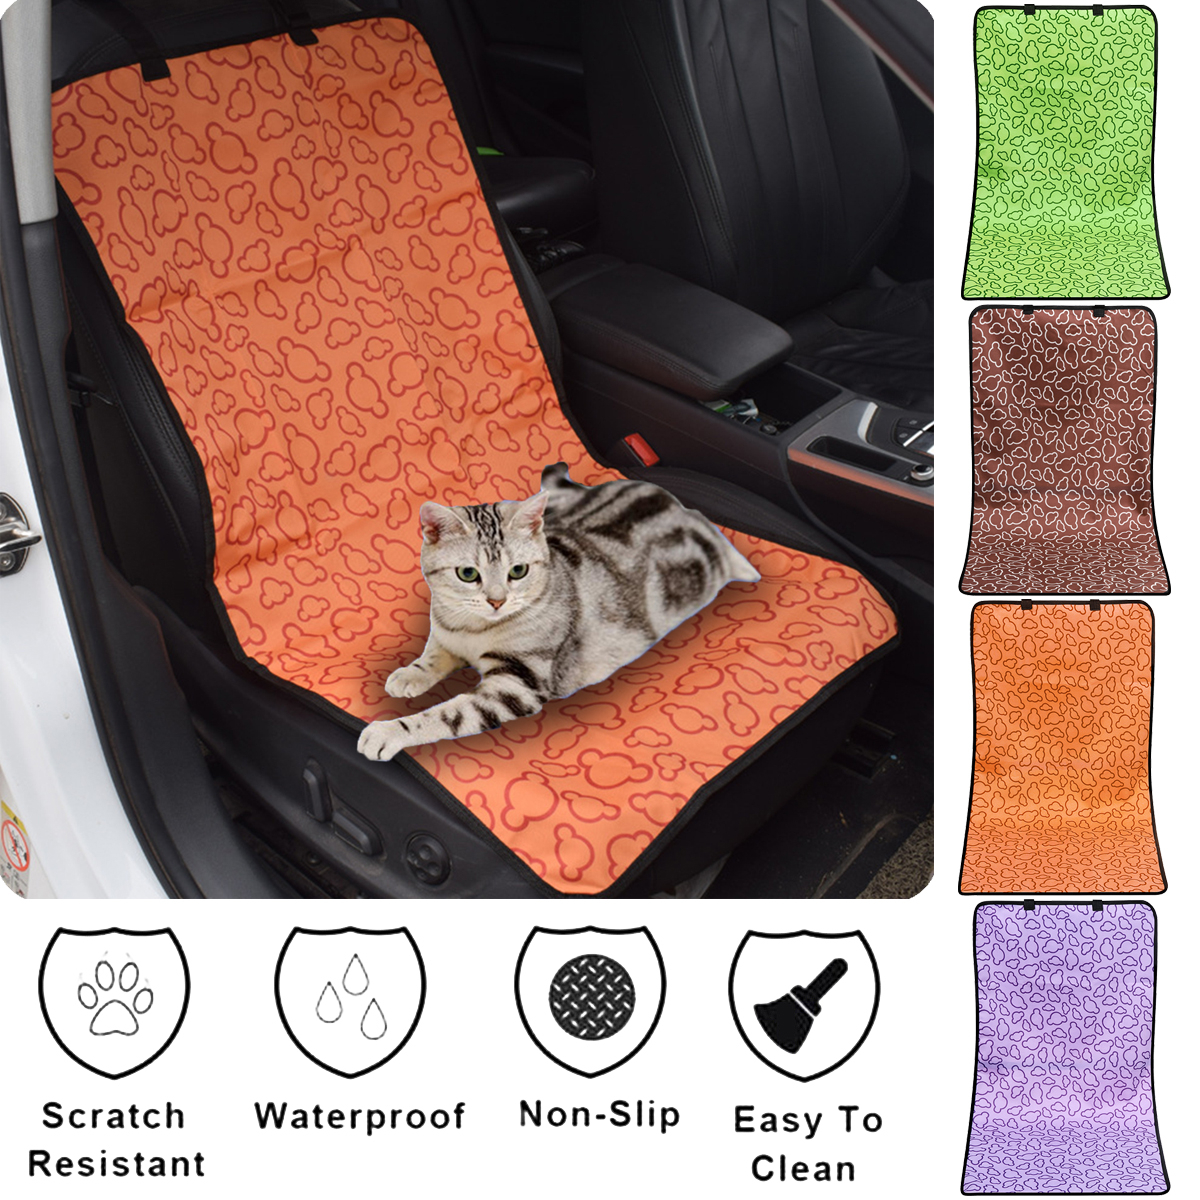 Dog-Car-Front-Seat-Cover-Waterproof-Pet-Cat-Dog-Carrier-Mat-for-Cars-SUV-Front-Seat-Cushion-Protecto-1809568-2